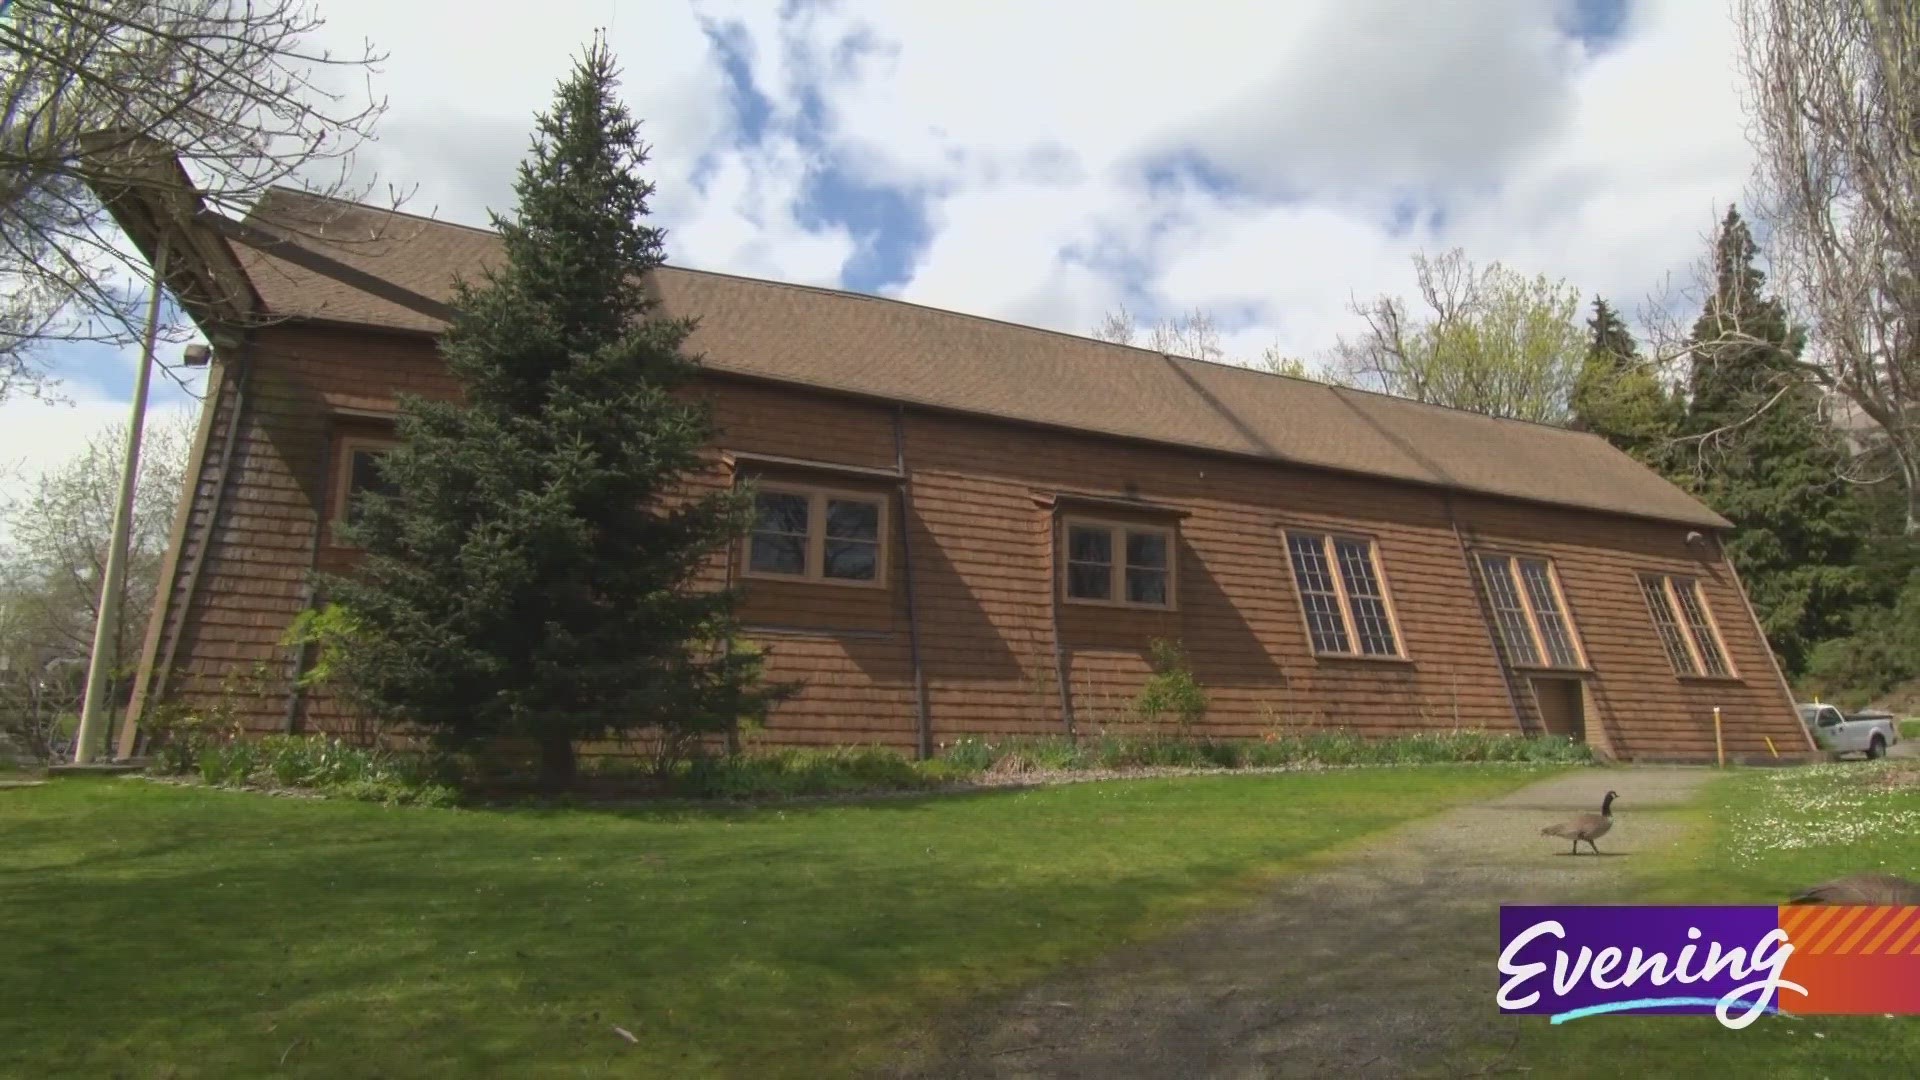 The University of Washington's historic shell house was home base for the 'Boys in the Boat.' #k5evening